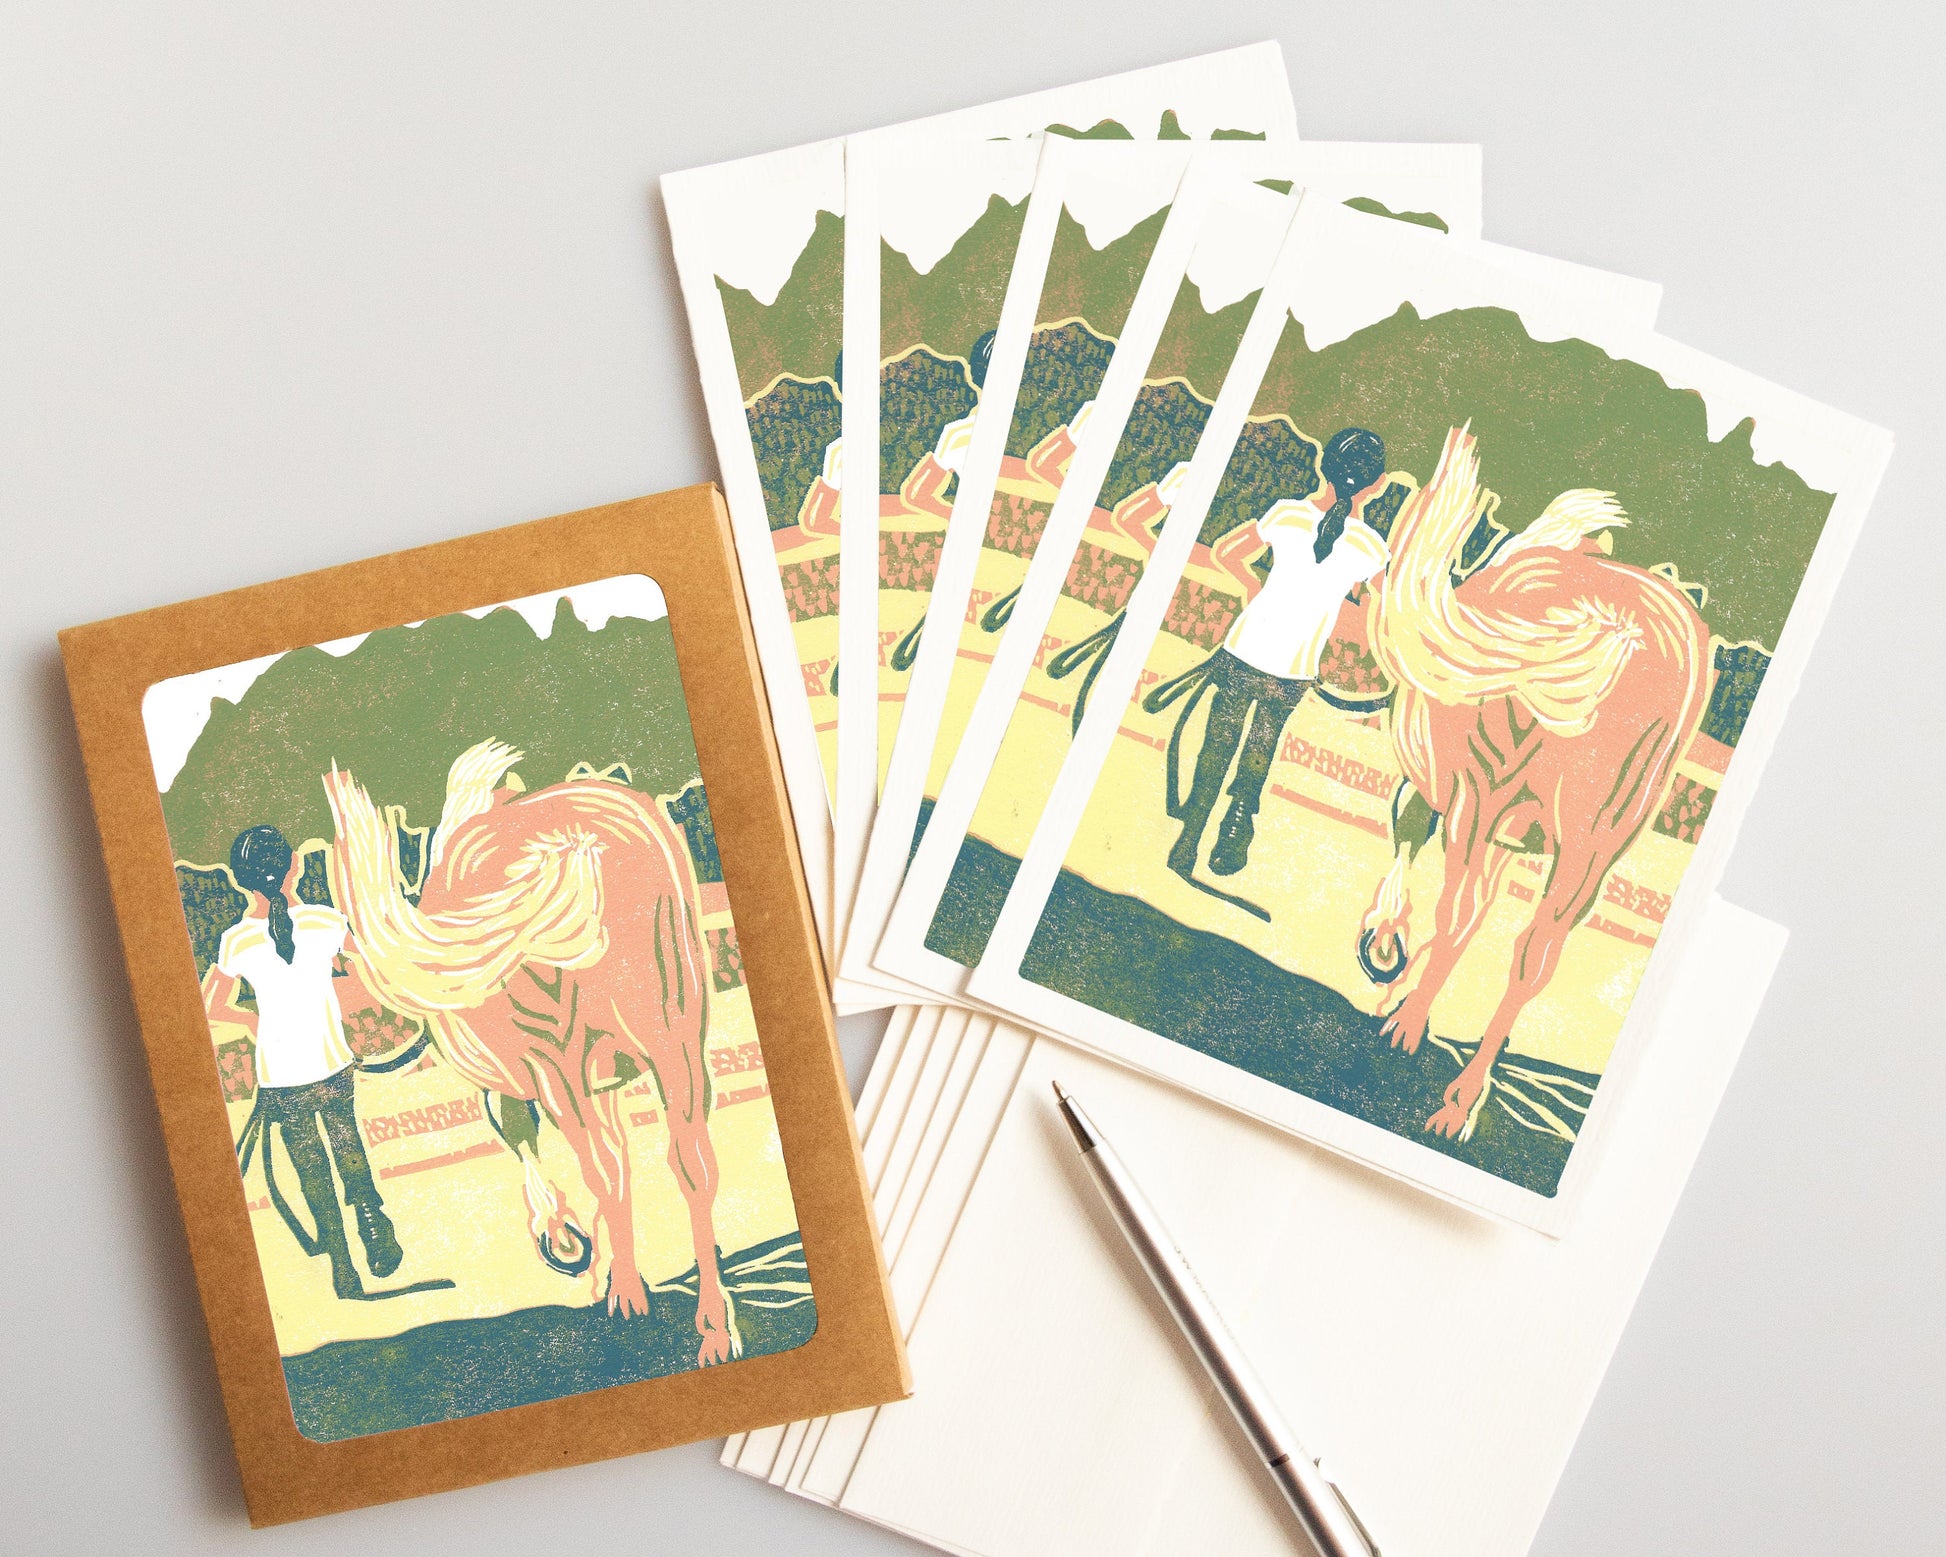 A casually elegant card set featuring horse art by Natalia Wohletz titled Forever Friends.